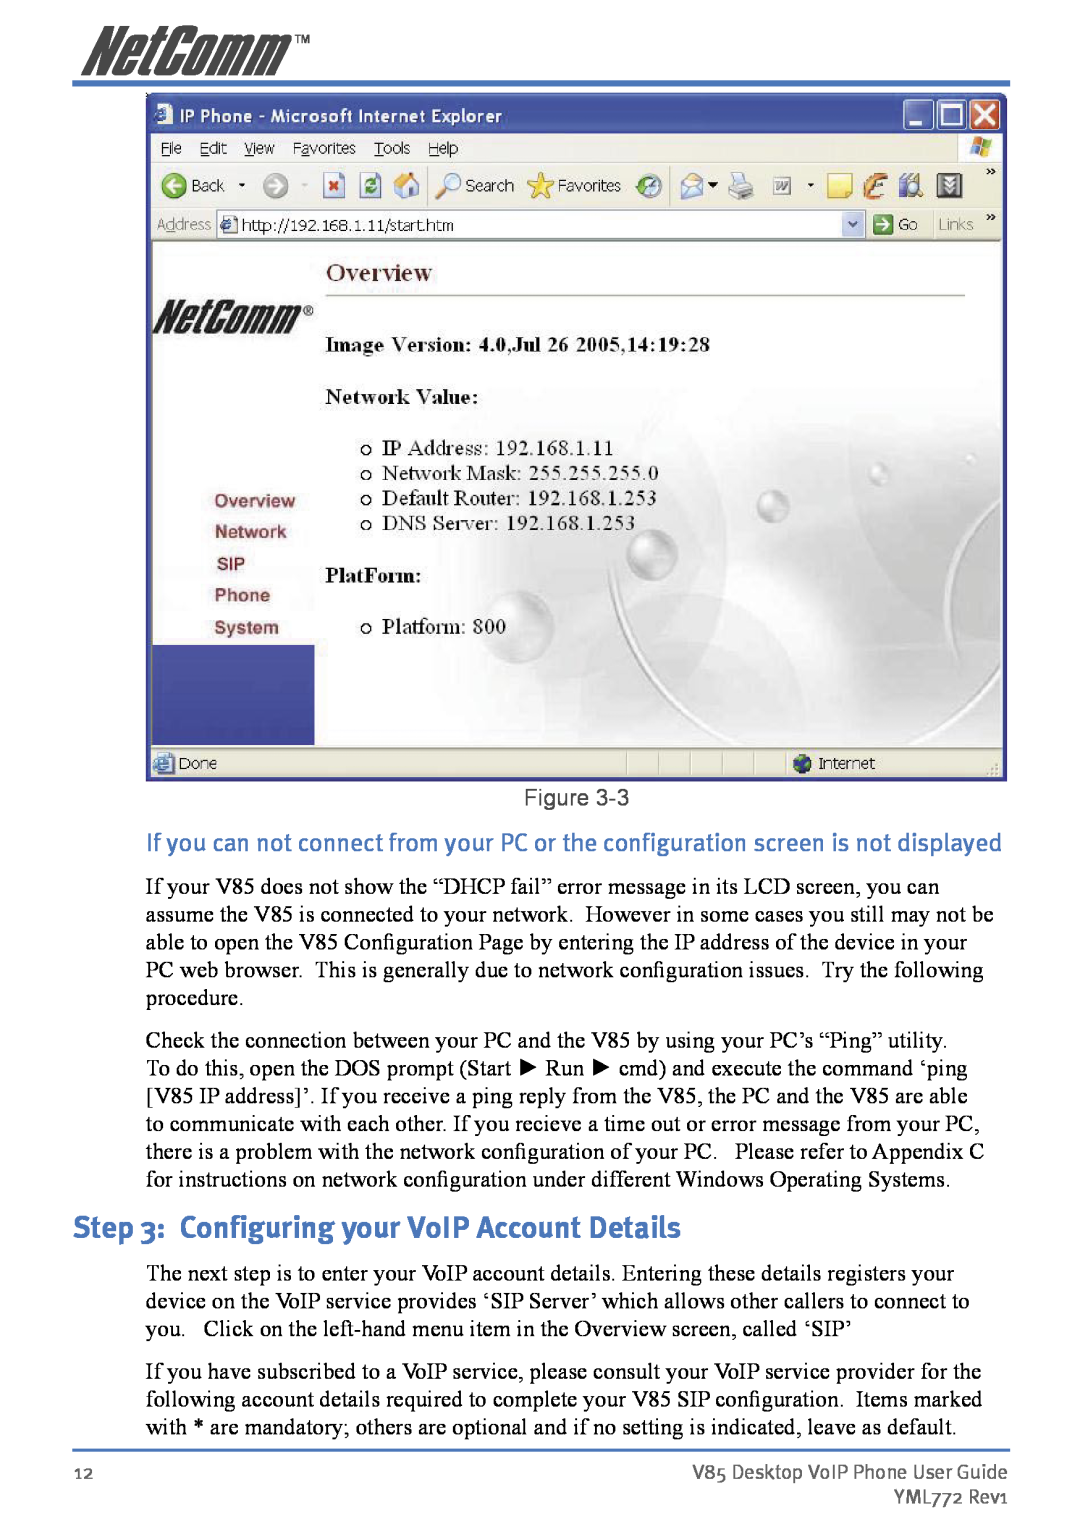 NetComm V85 manual Configuring your VoIP Account Details 